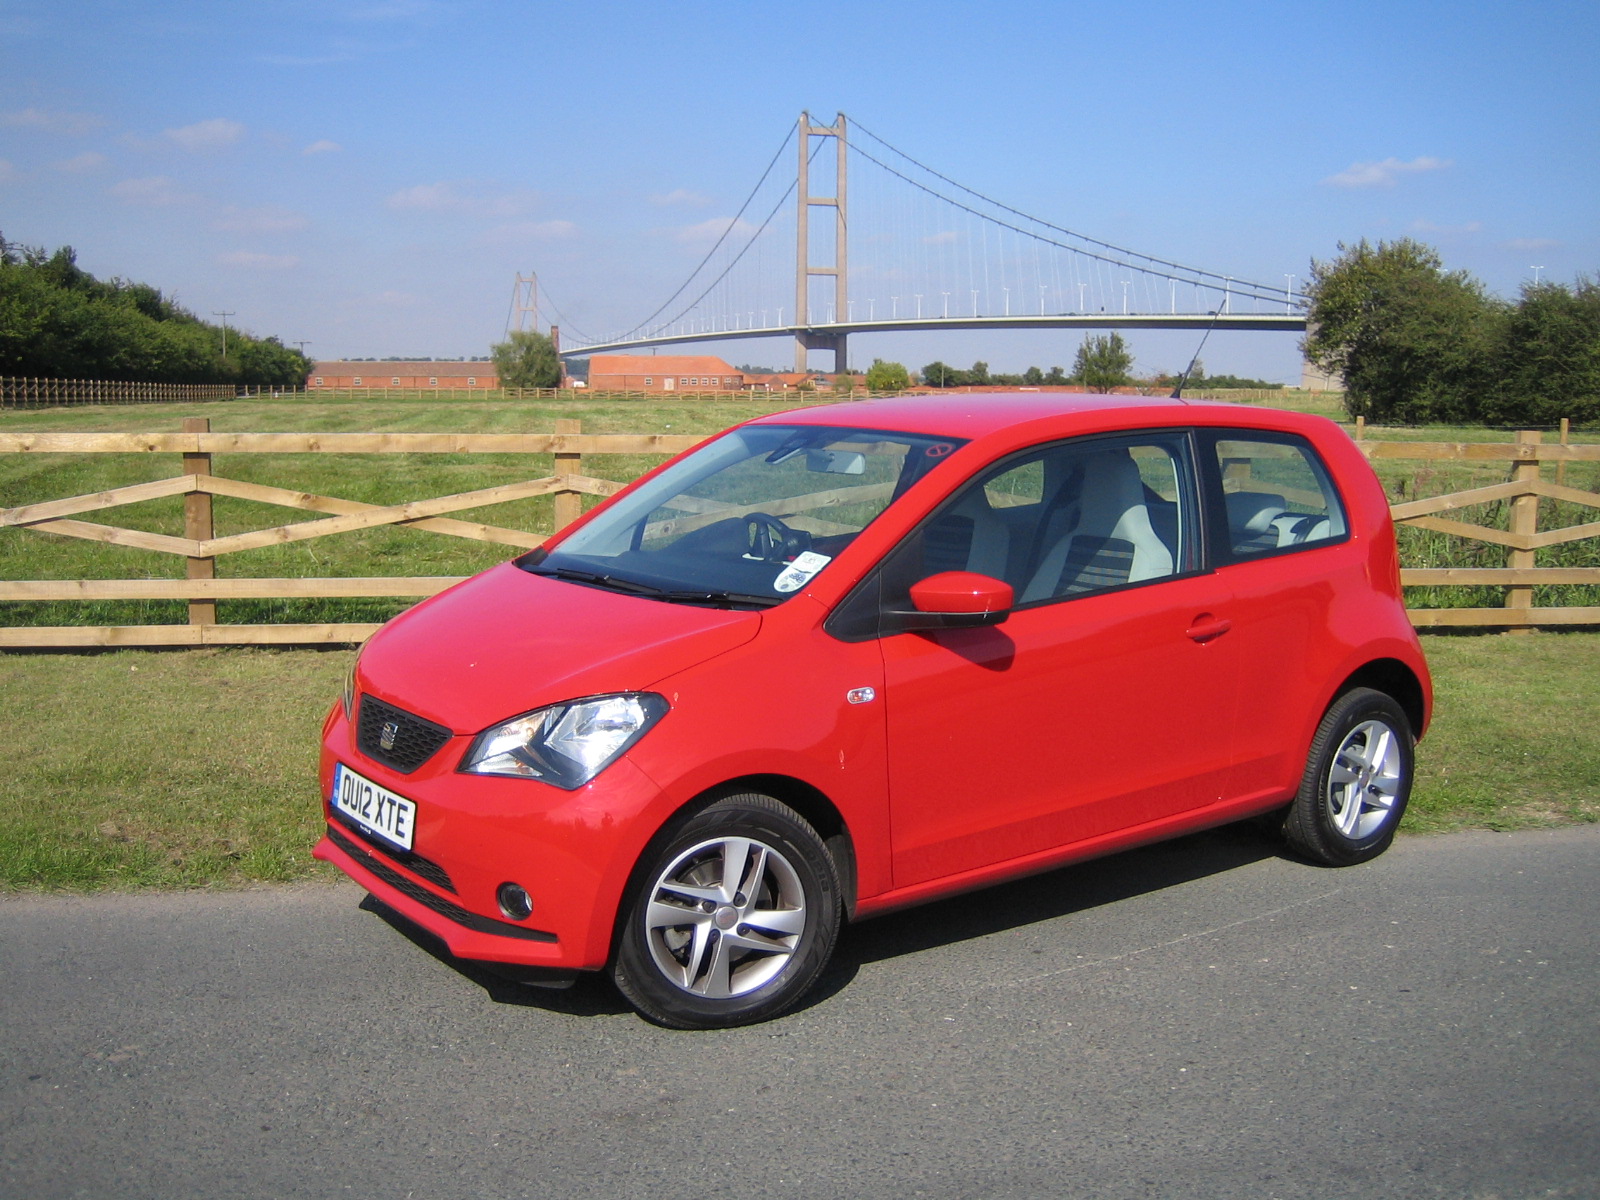 We review the SEAT Mii 1.0 on a week's road test